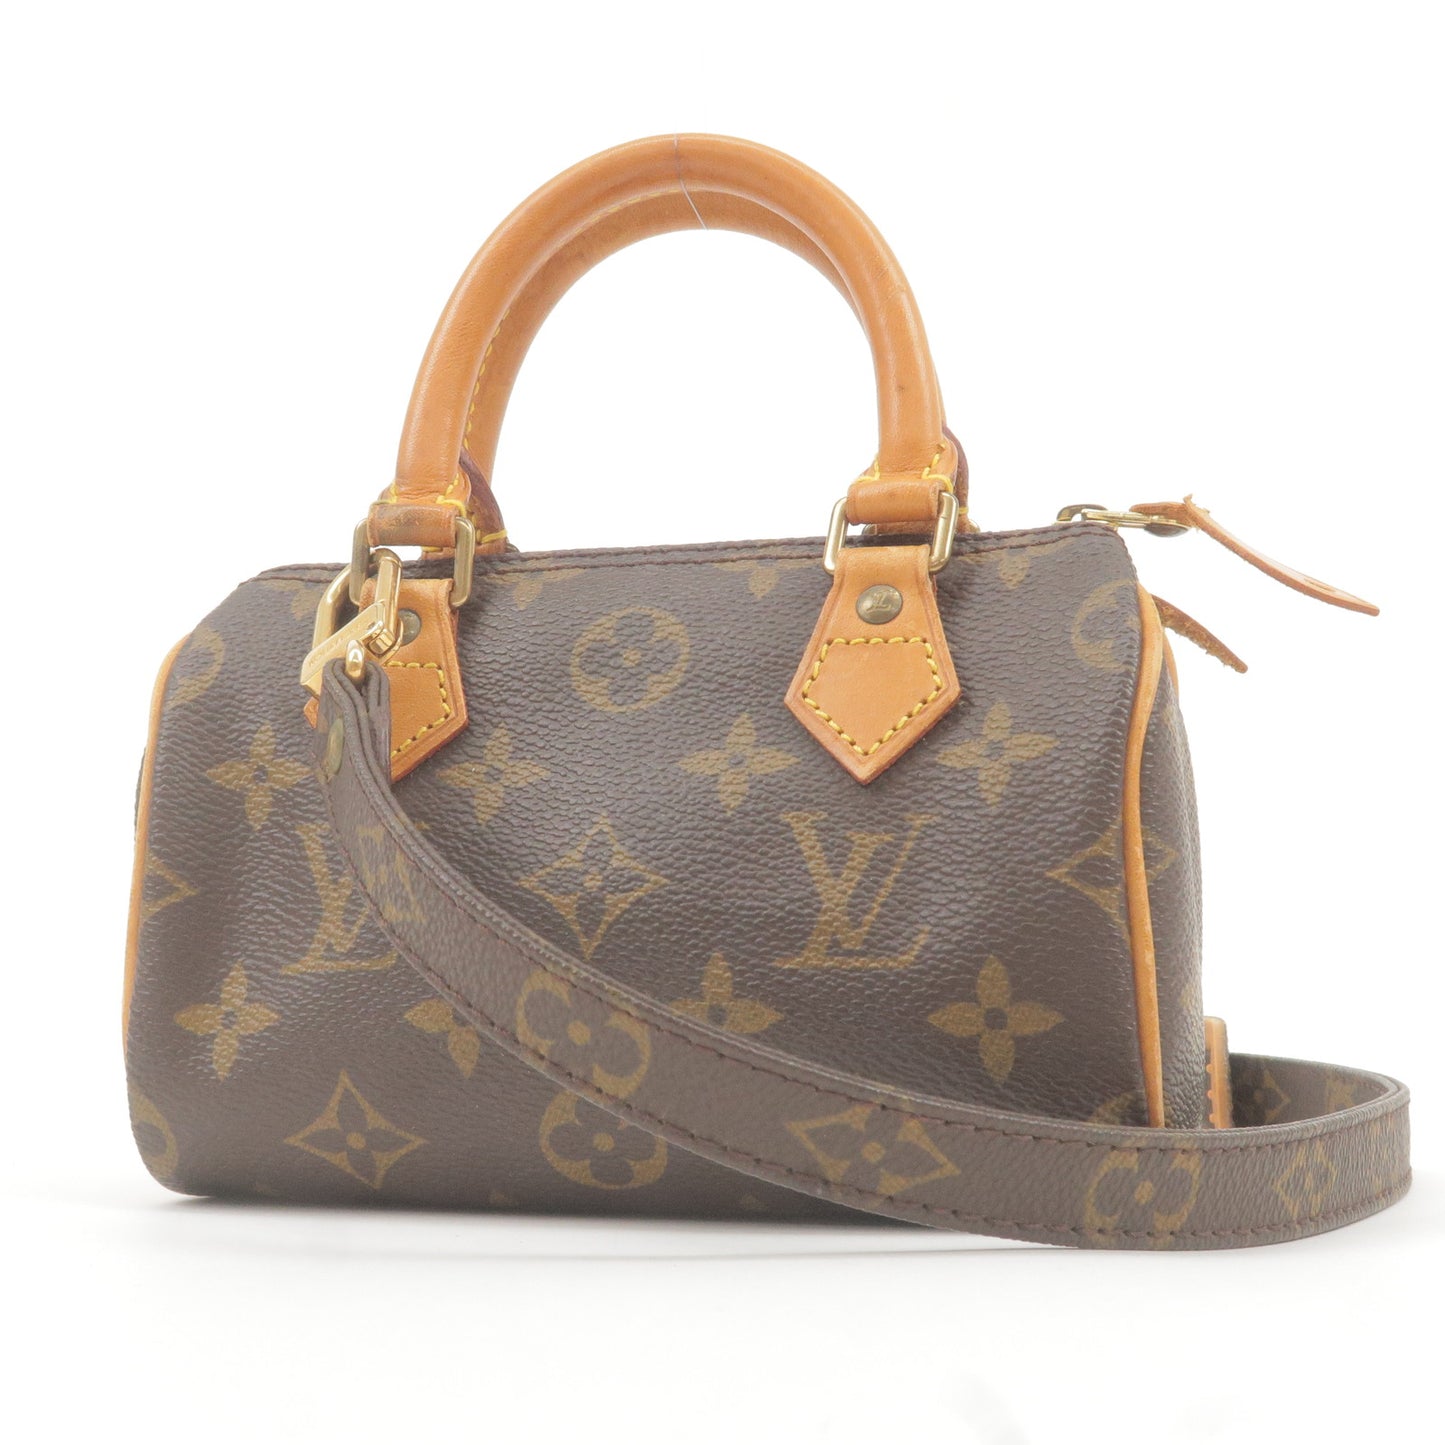 Replacement Calf Leather Bag Strap for LV Croisette, Luxury, Bags